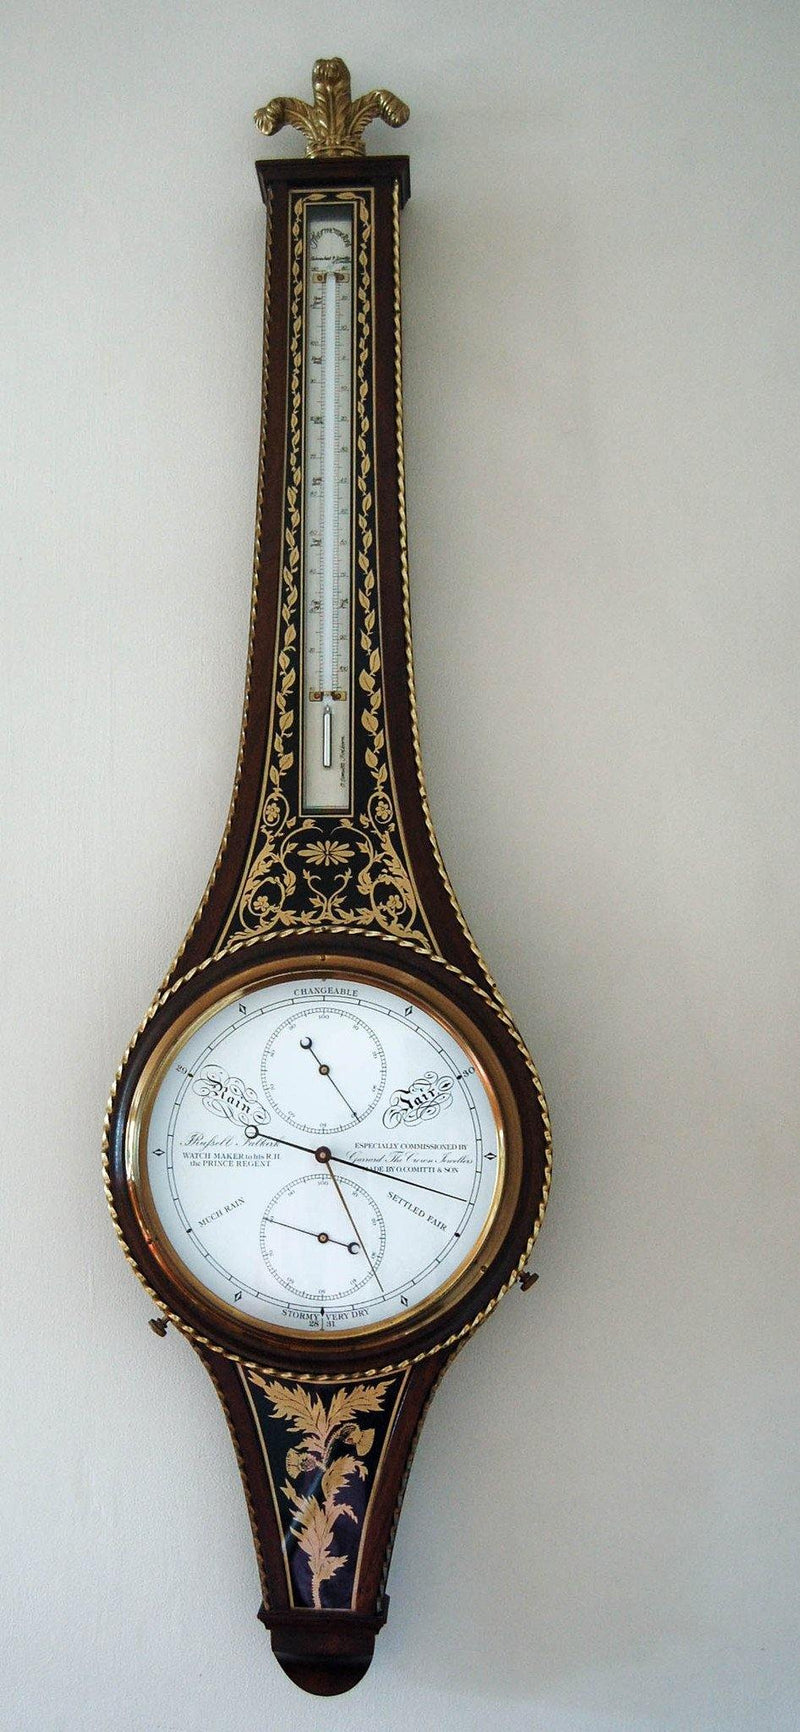 Aneroid Wheel Barometer to Commemorate The Marriage of Charles & Diana by Comitti & Garrard - Jason Clarke Antiques